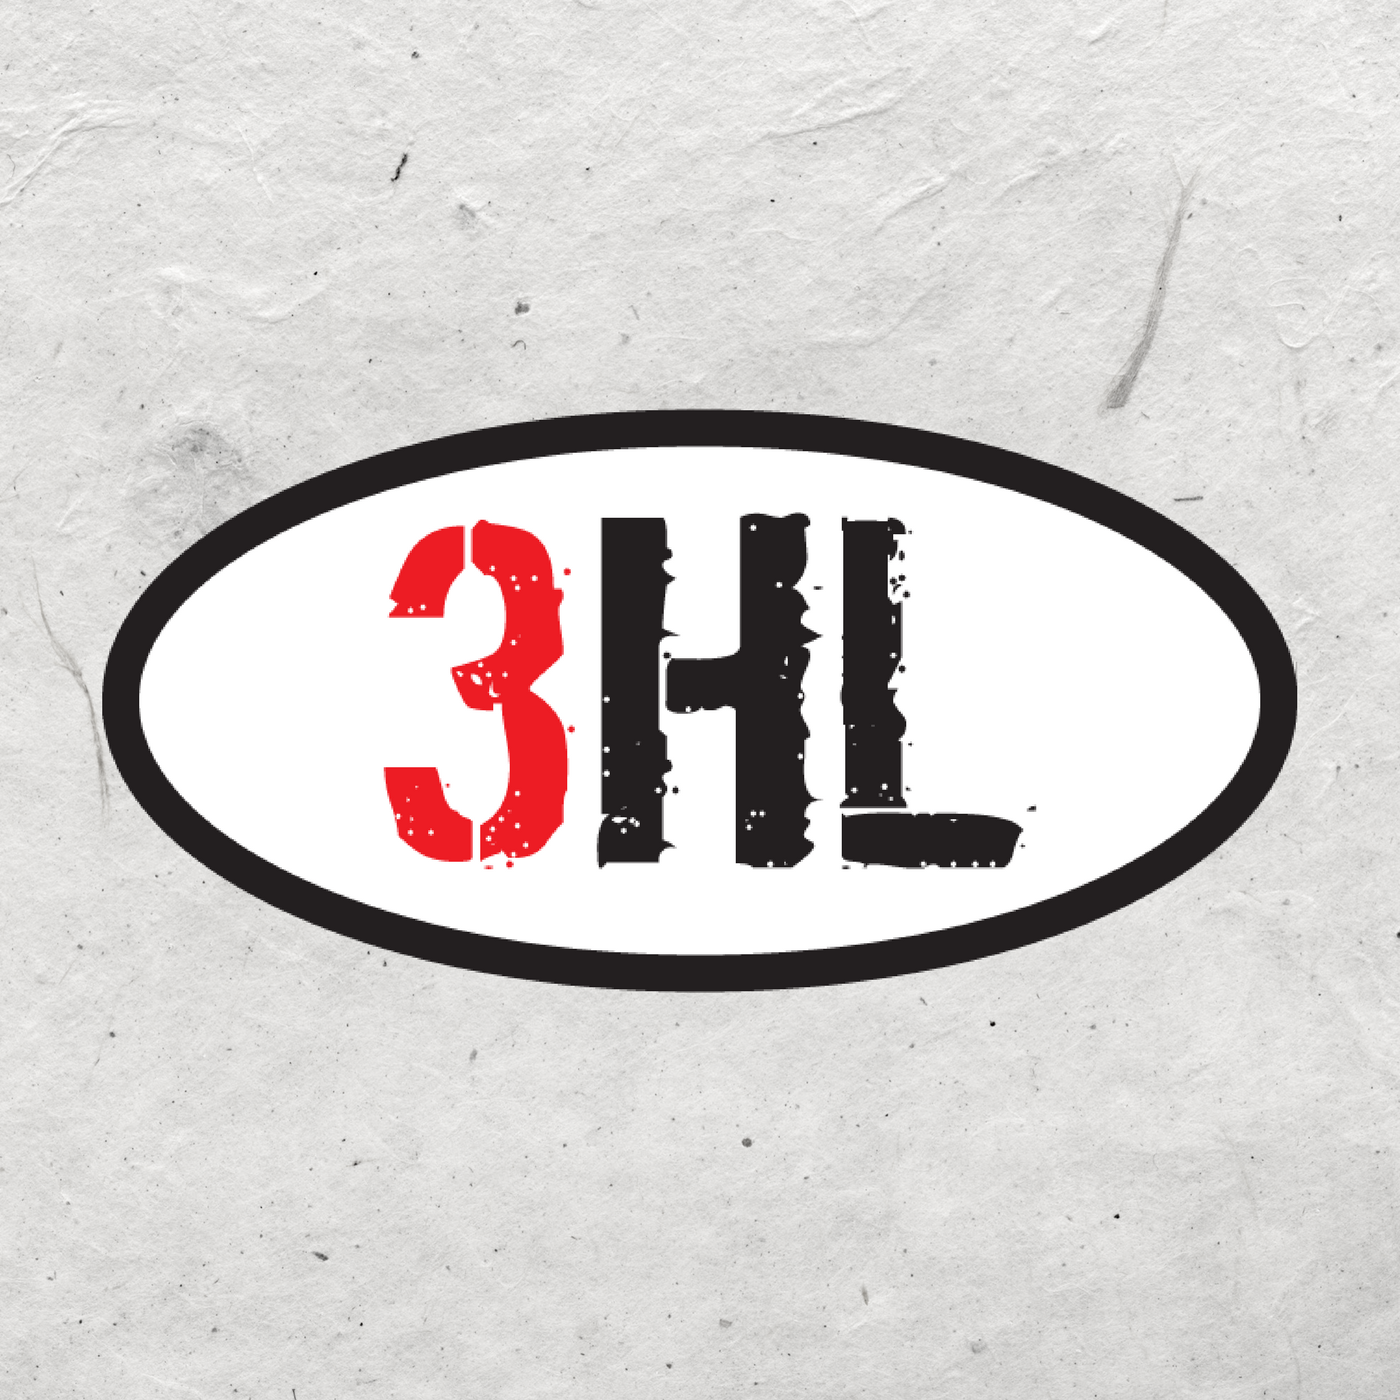 Mike Keith on 3HL - The NFL Draft Scratches That Important Football Itch